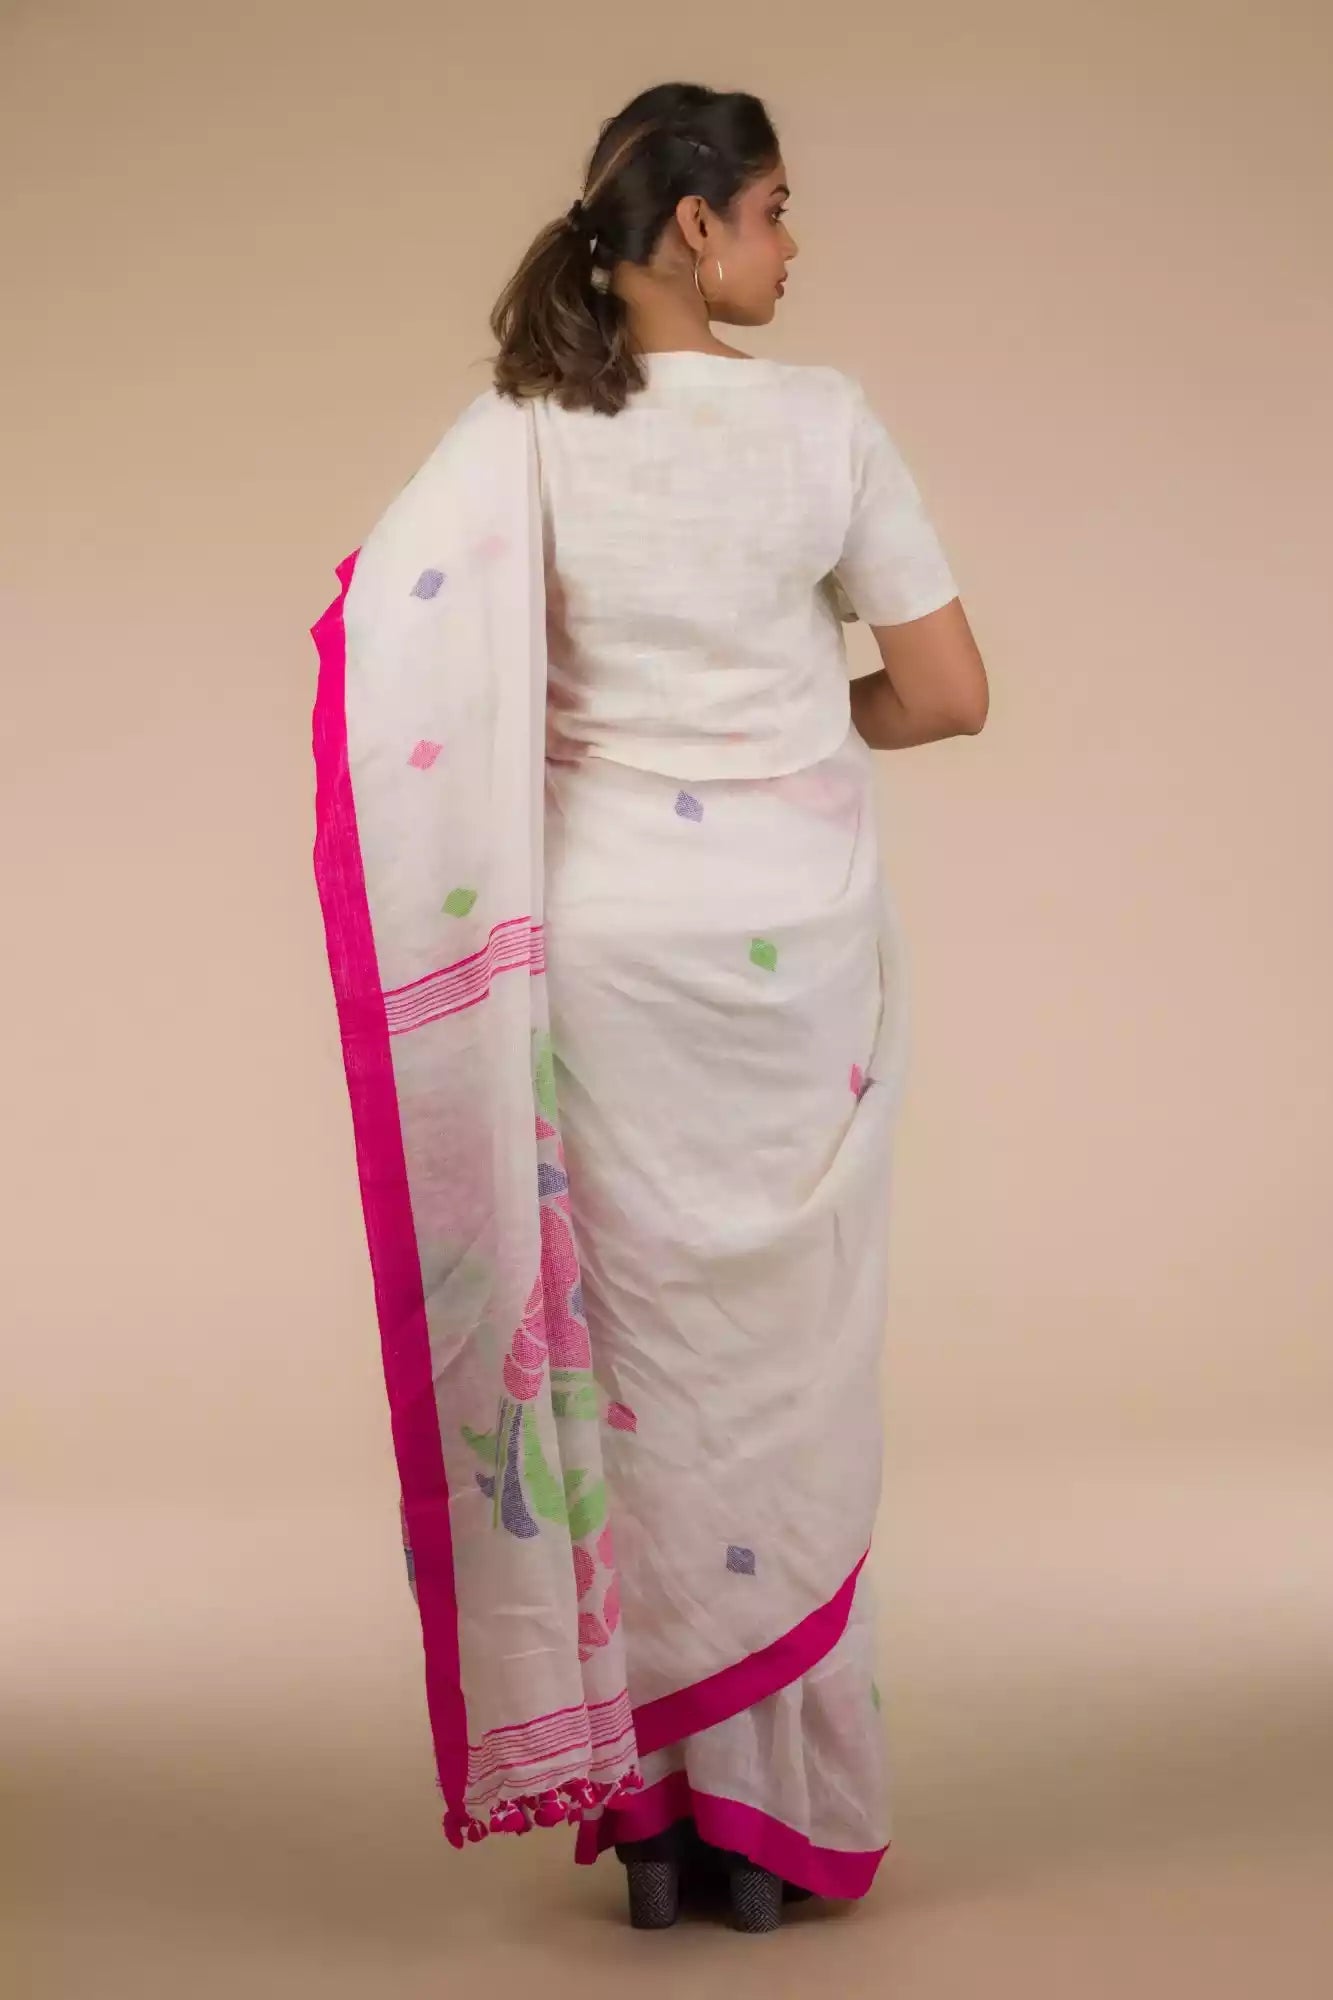 back view of a woman wearing a white saree with pink polka dot work on it and the bottom half